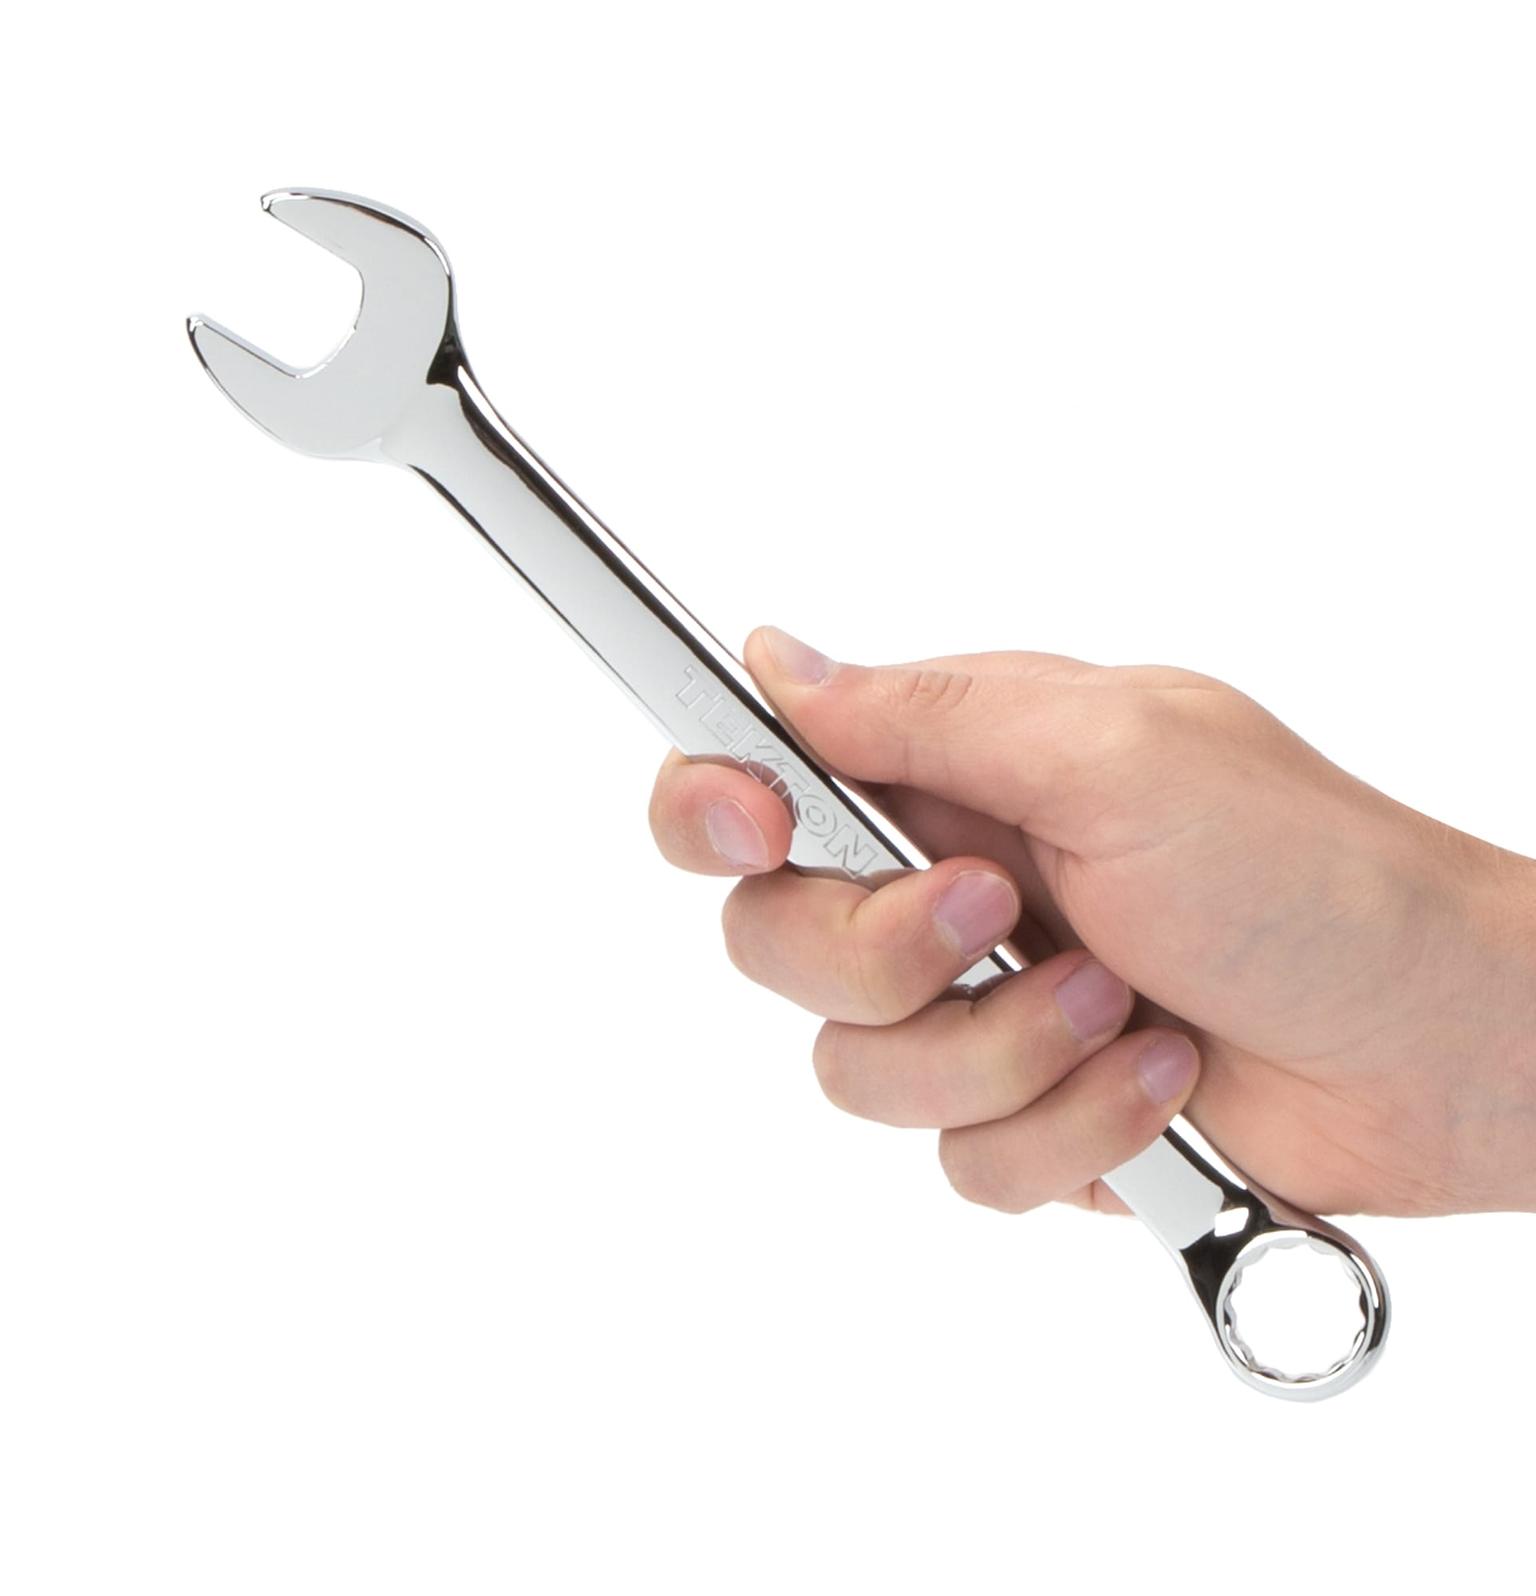 TEKTON 18286-T 16 mm Combination Wrench